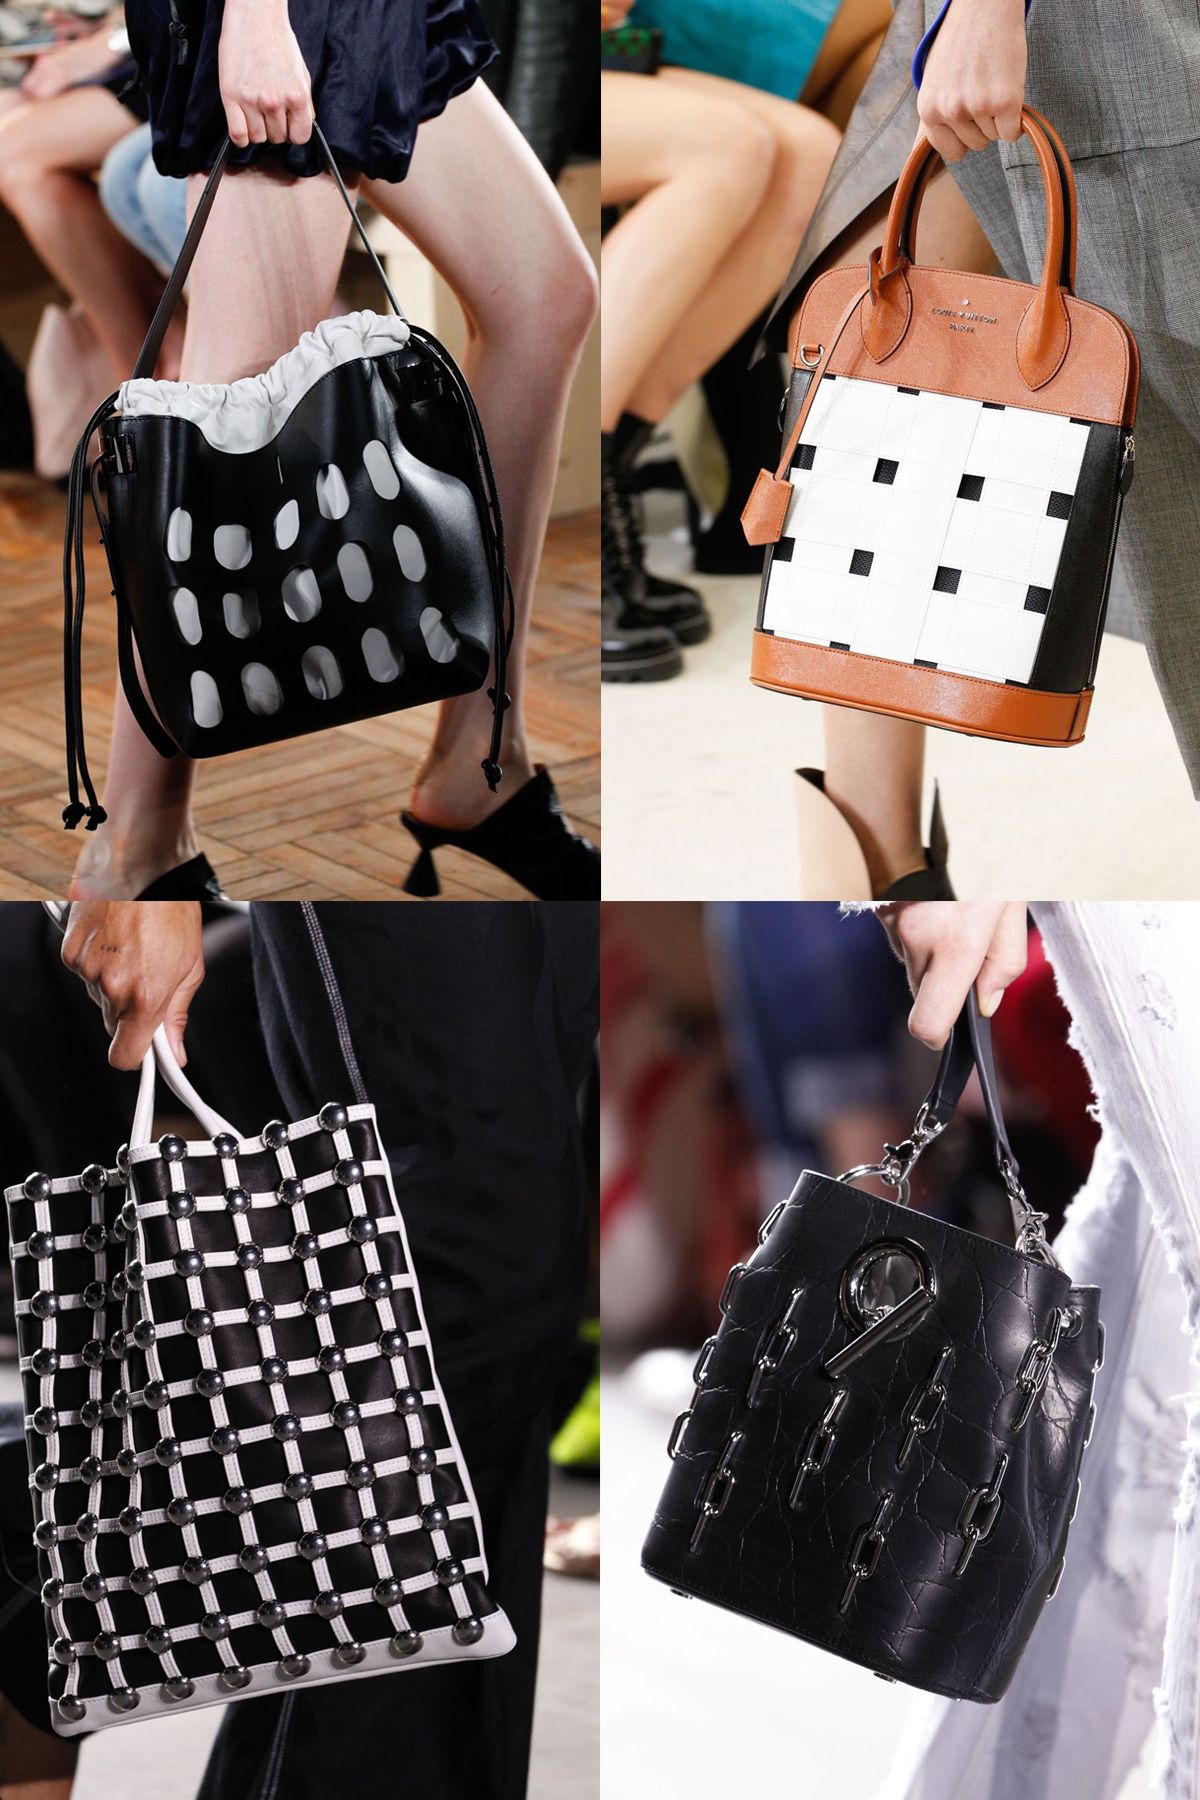 5 Most Stylish Work Bag Inspirations That Are Ready To Be Relyed On For The Office